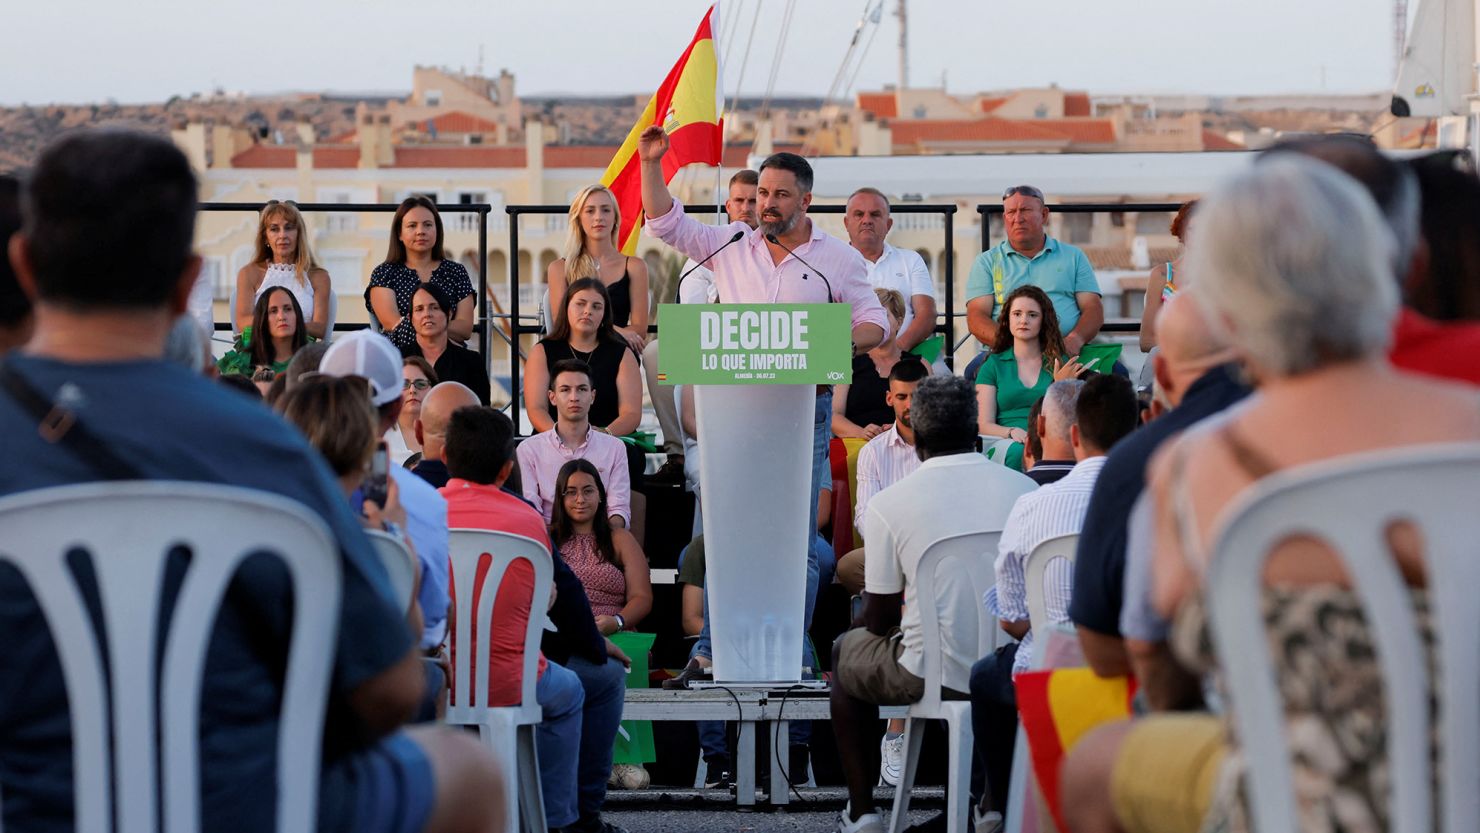 Vox party leader Santiago Abascal speaks at a campaign event on July 6.
